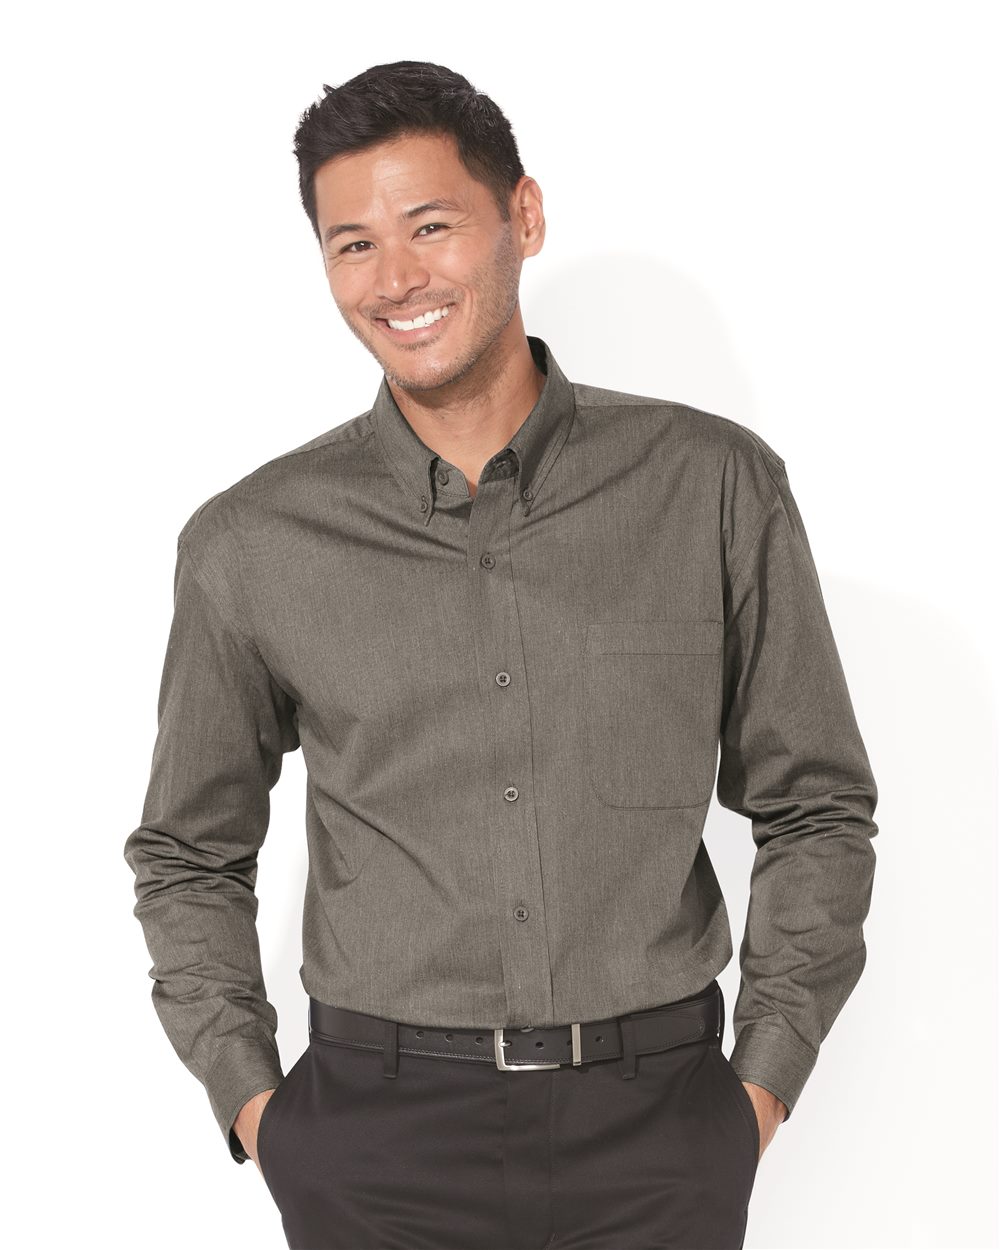 FeatherLite Long Sleeve Stain-Resistant Twill Shirt 3281 - Model Image